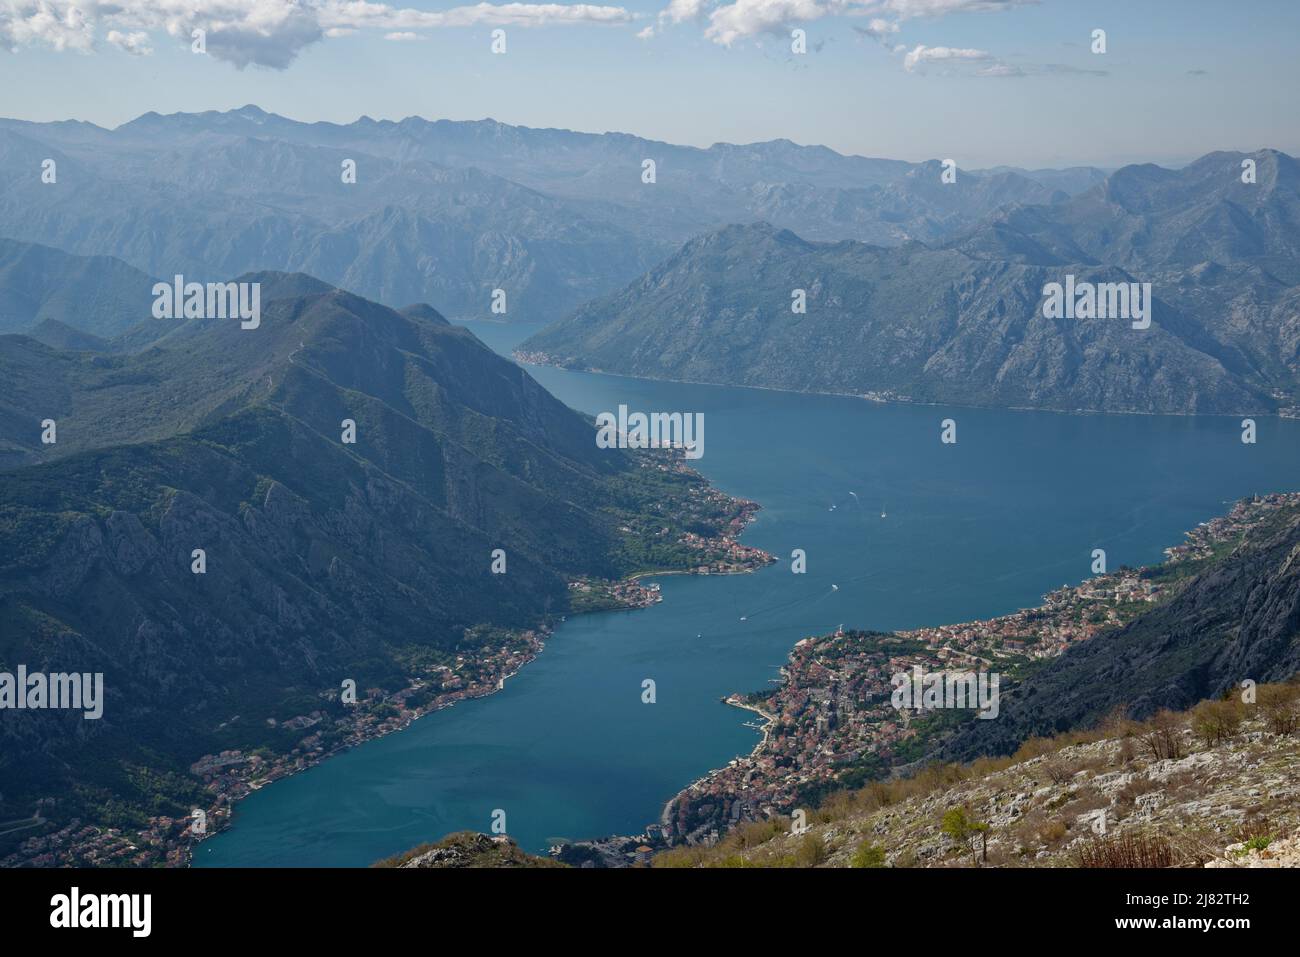 View of the bay of Kotor, Montenegro. Villages and the town of Kotor at the edge of the sea with dramatic surrounding mountains. Stock Photo